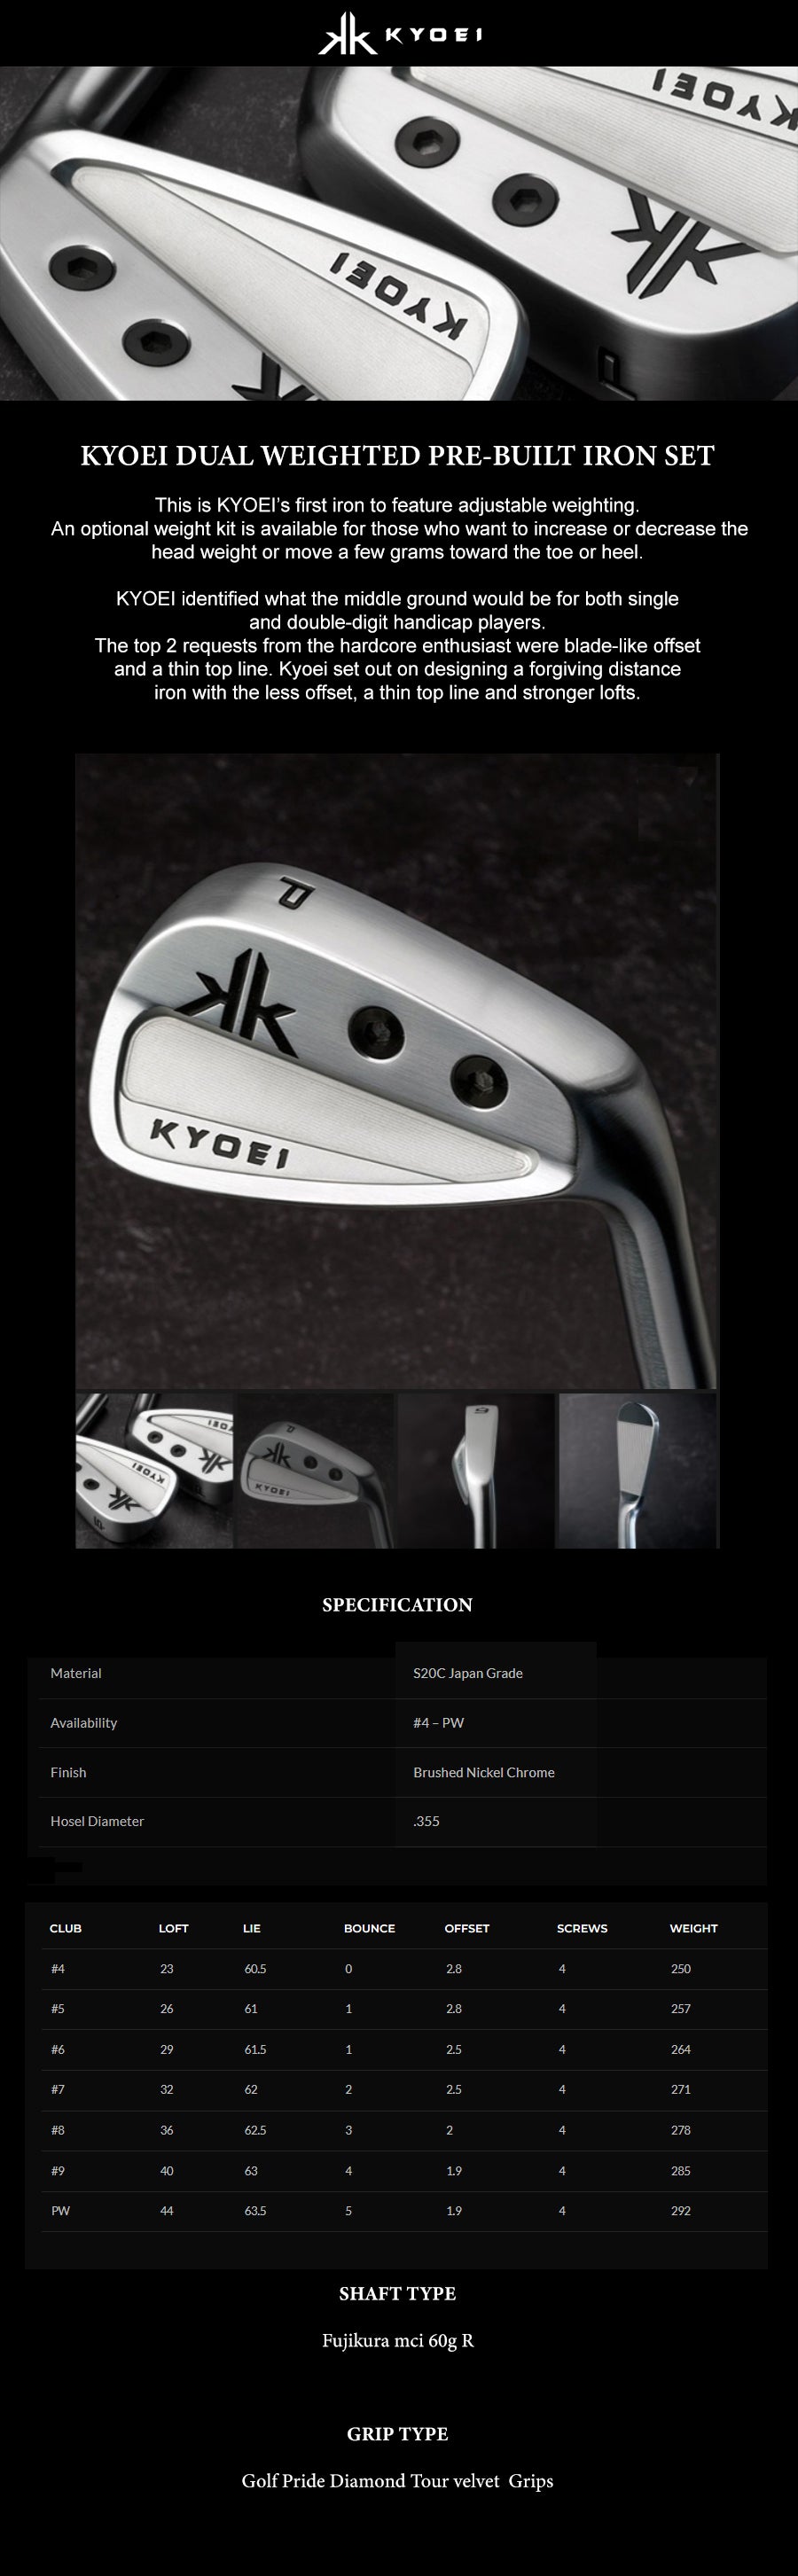 KYOEI-DUAL-WEIGHTED-PRE-BUILT-IRON-SET